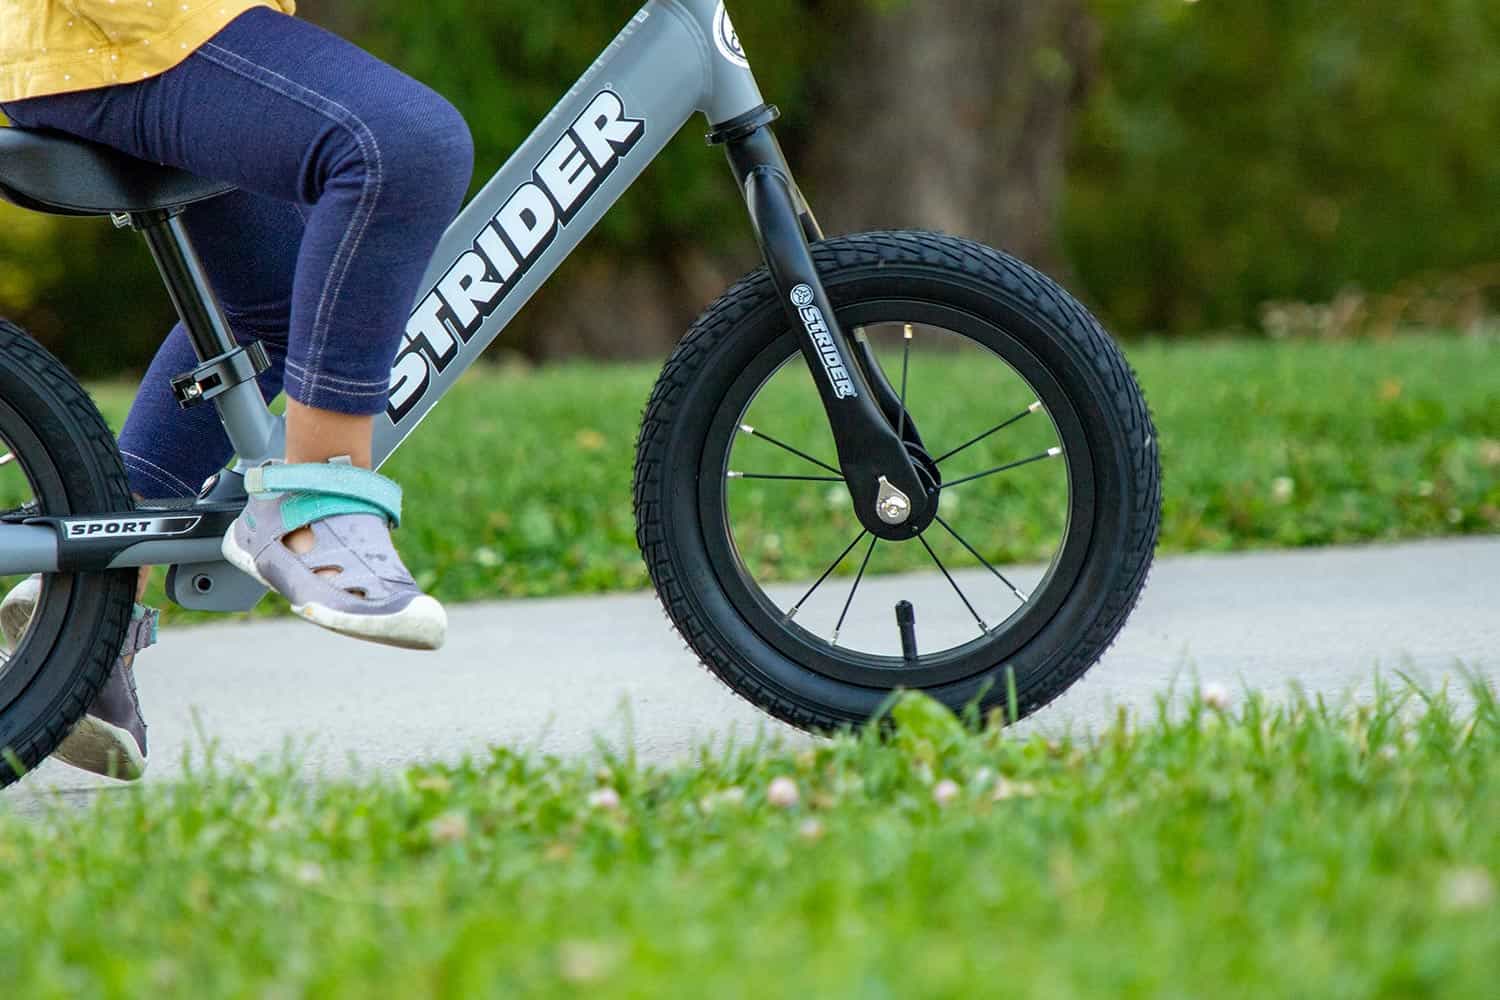 A close up of a gray Strider 12 balance bike equipped with high-traction wheels